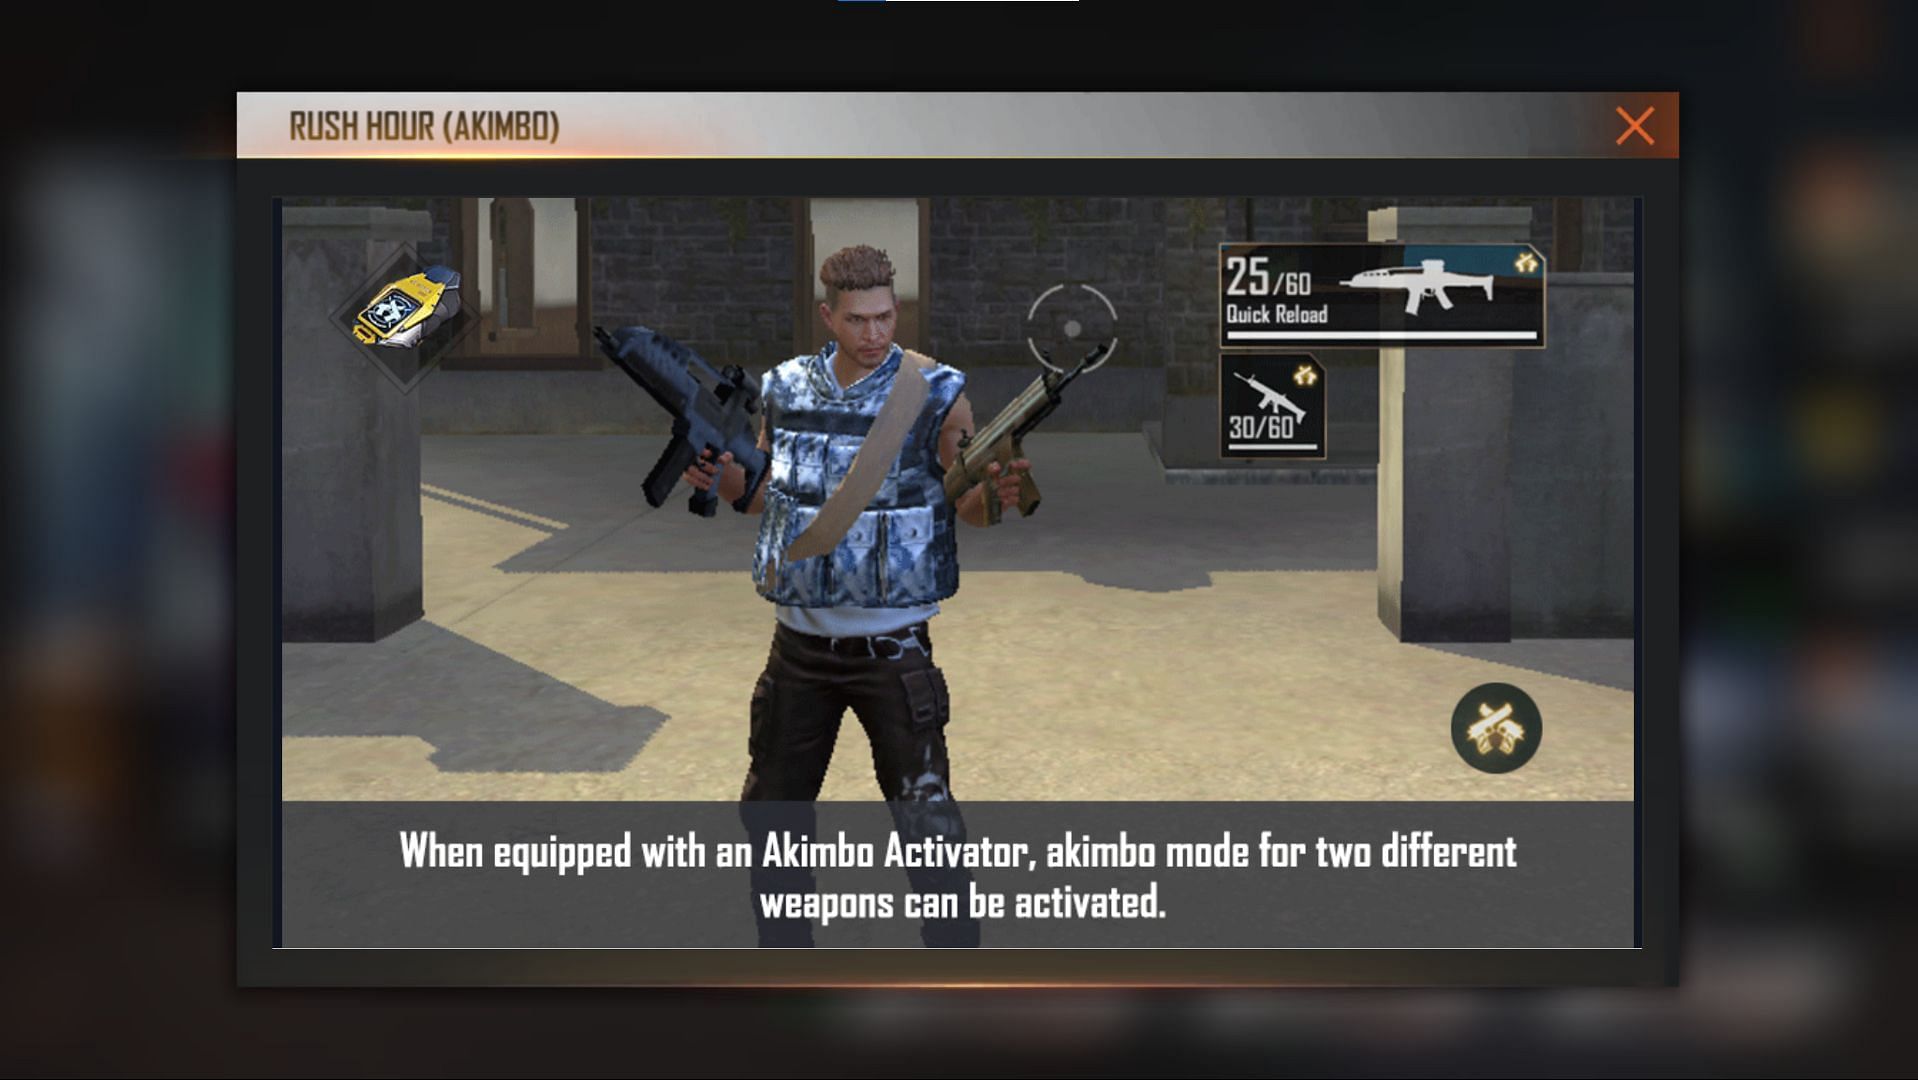 The mode offers players an opportunity to test out Akimbo Activator (Image via Garena)